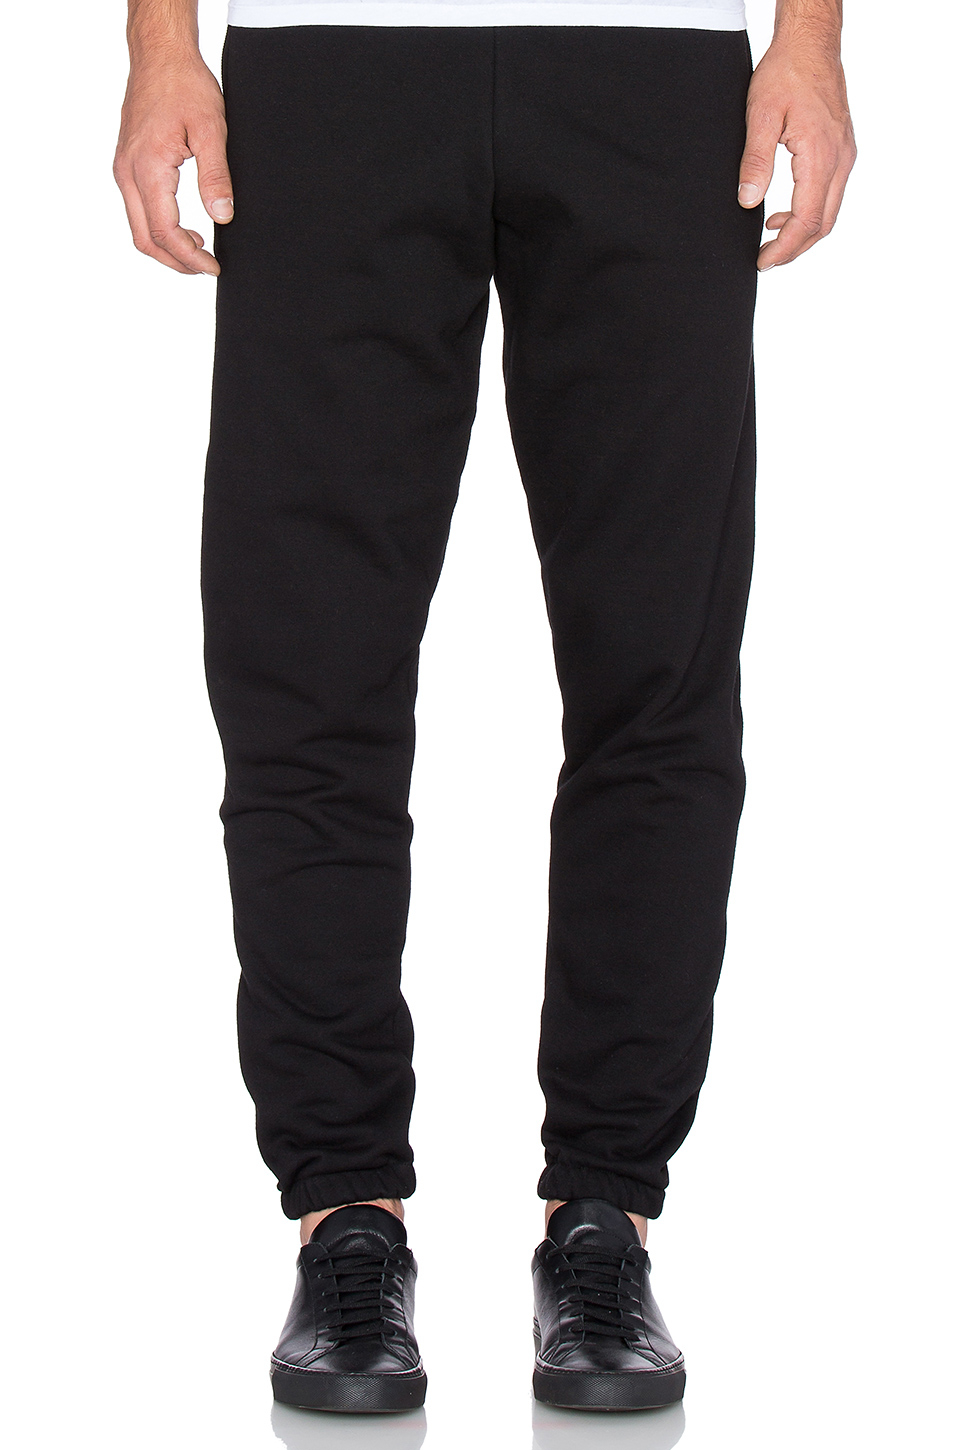 Carhartt WIP Cotton Chase Sweatpant in Black for Men - Lyst